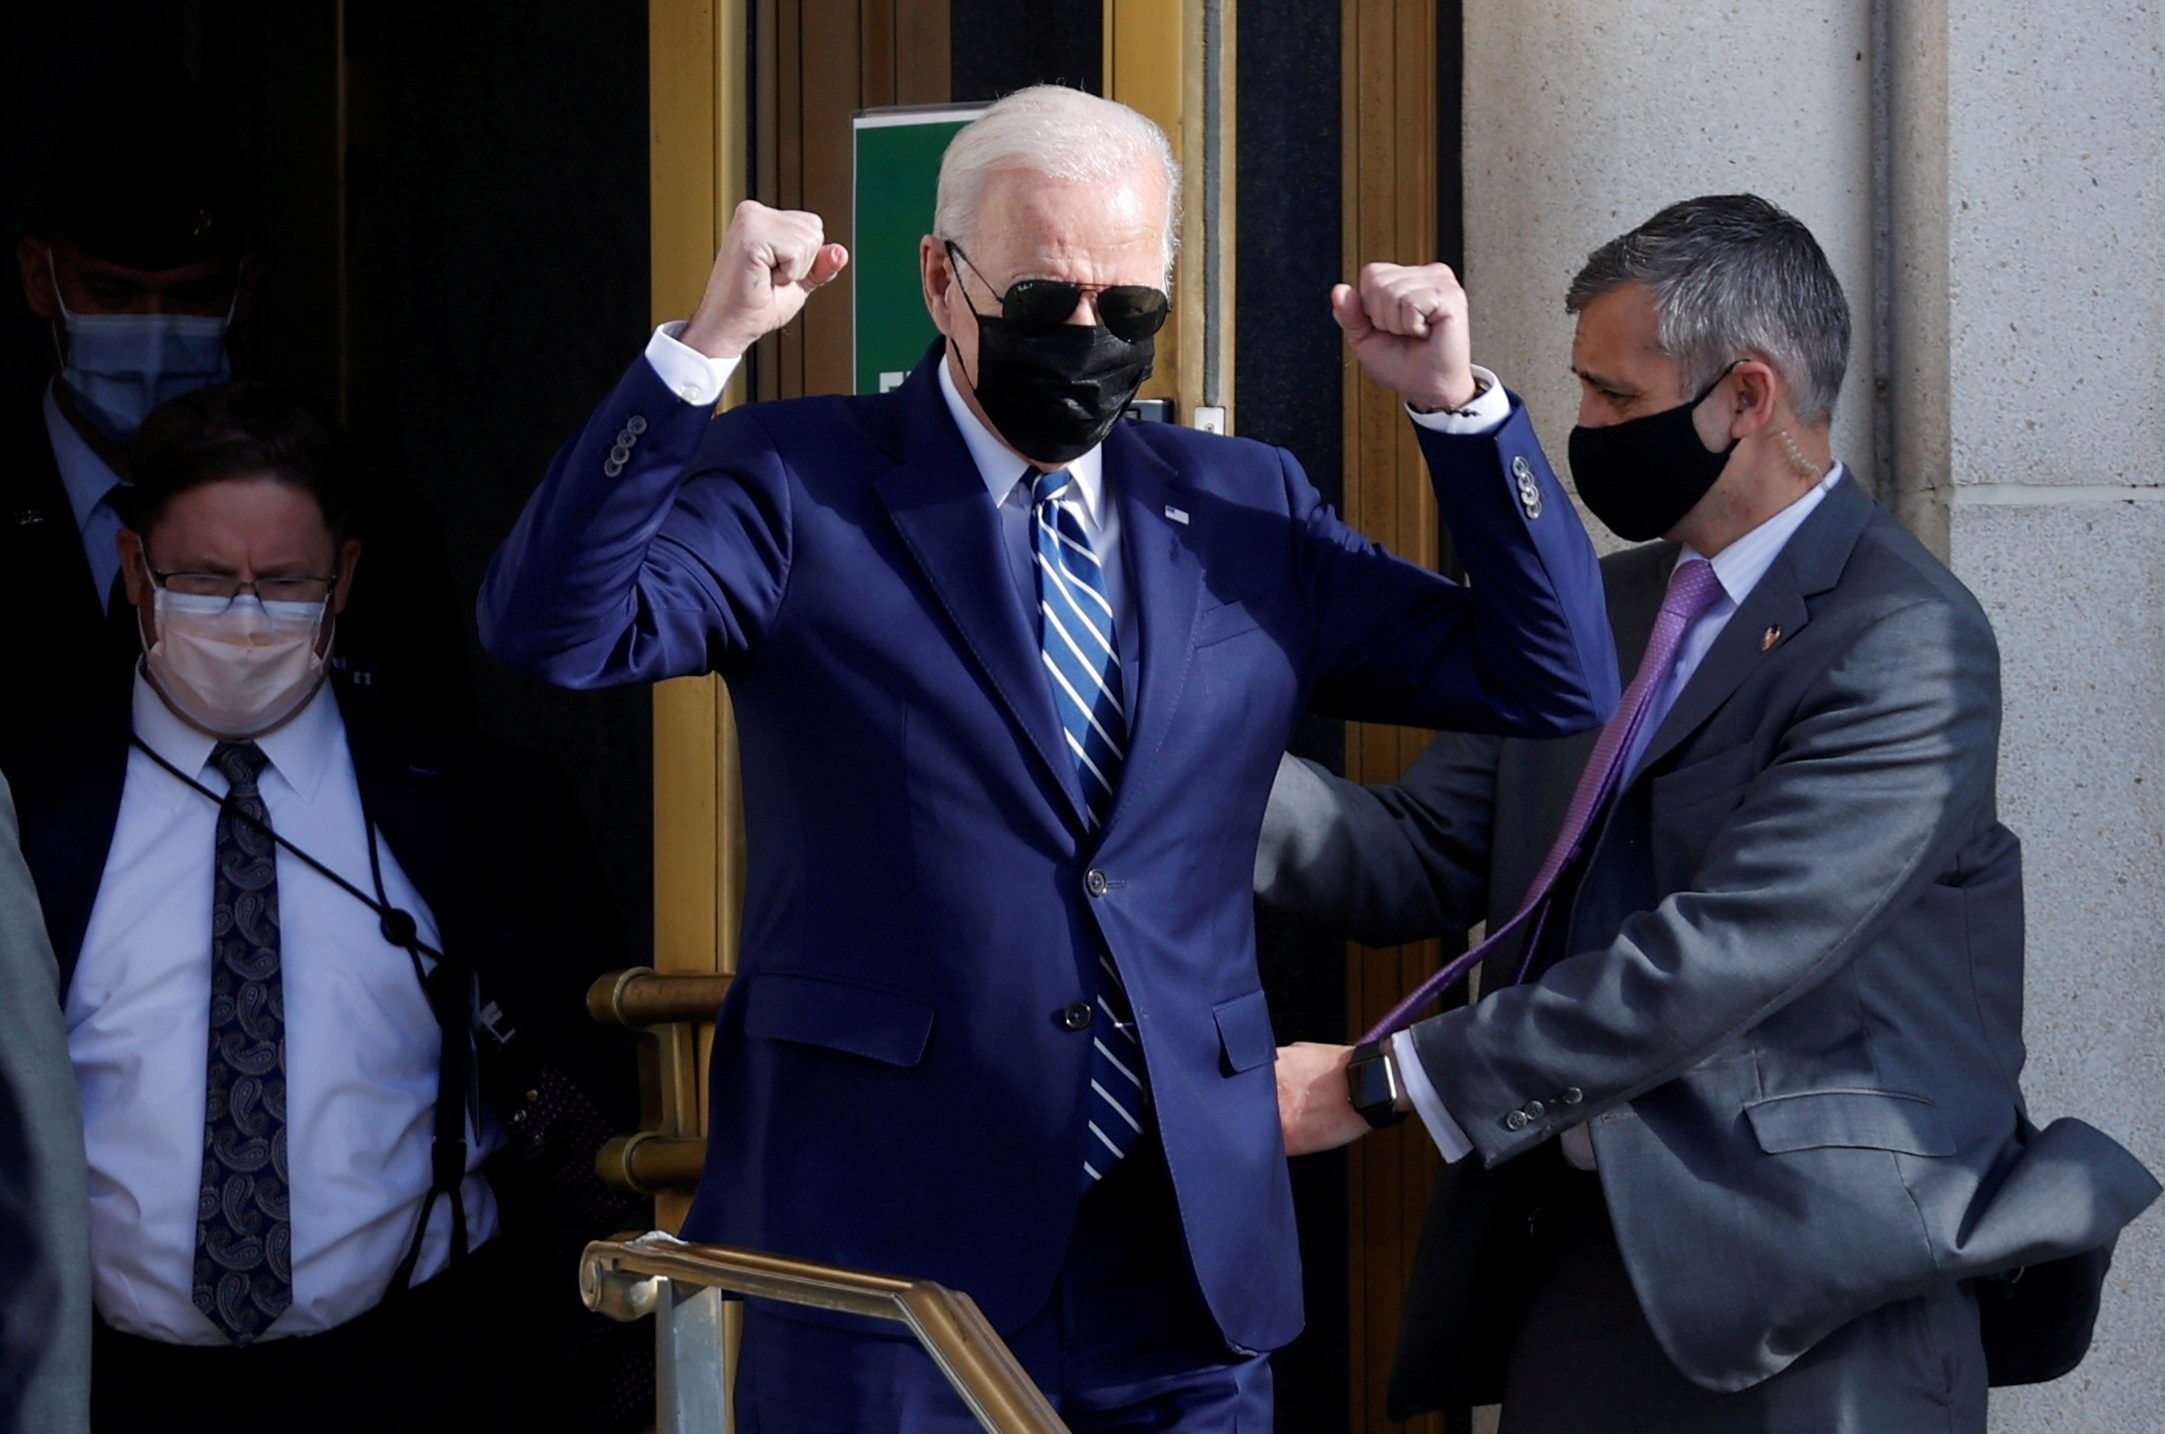 Polyp removed during Biden’s colonoscopy is ‘benign’ – White House physician